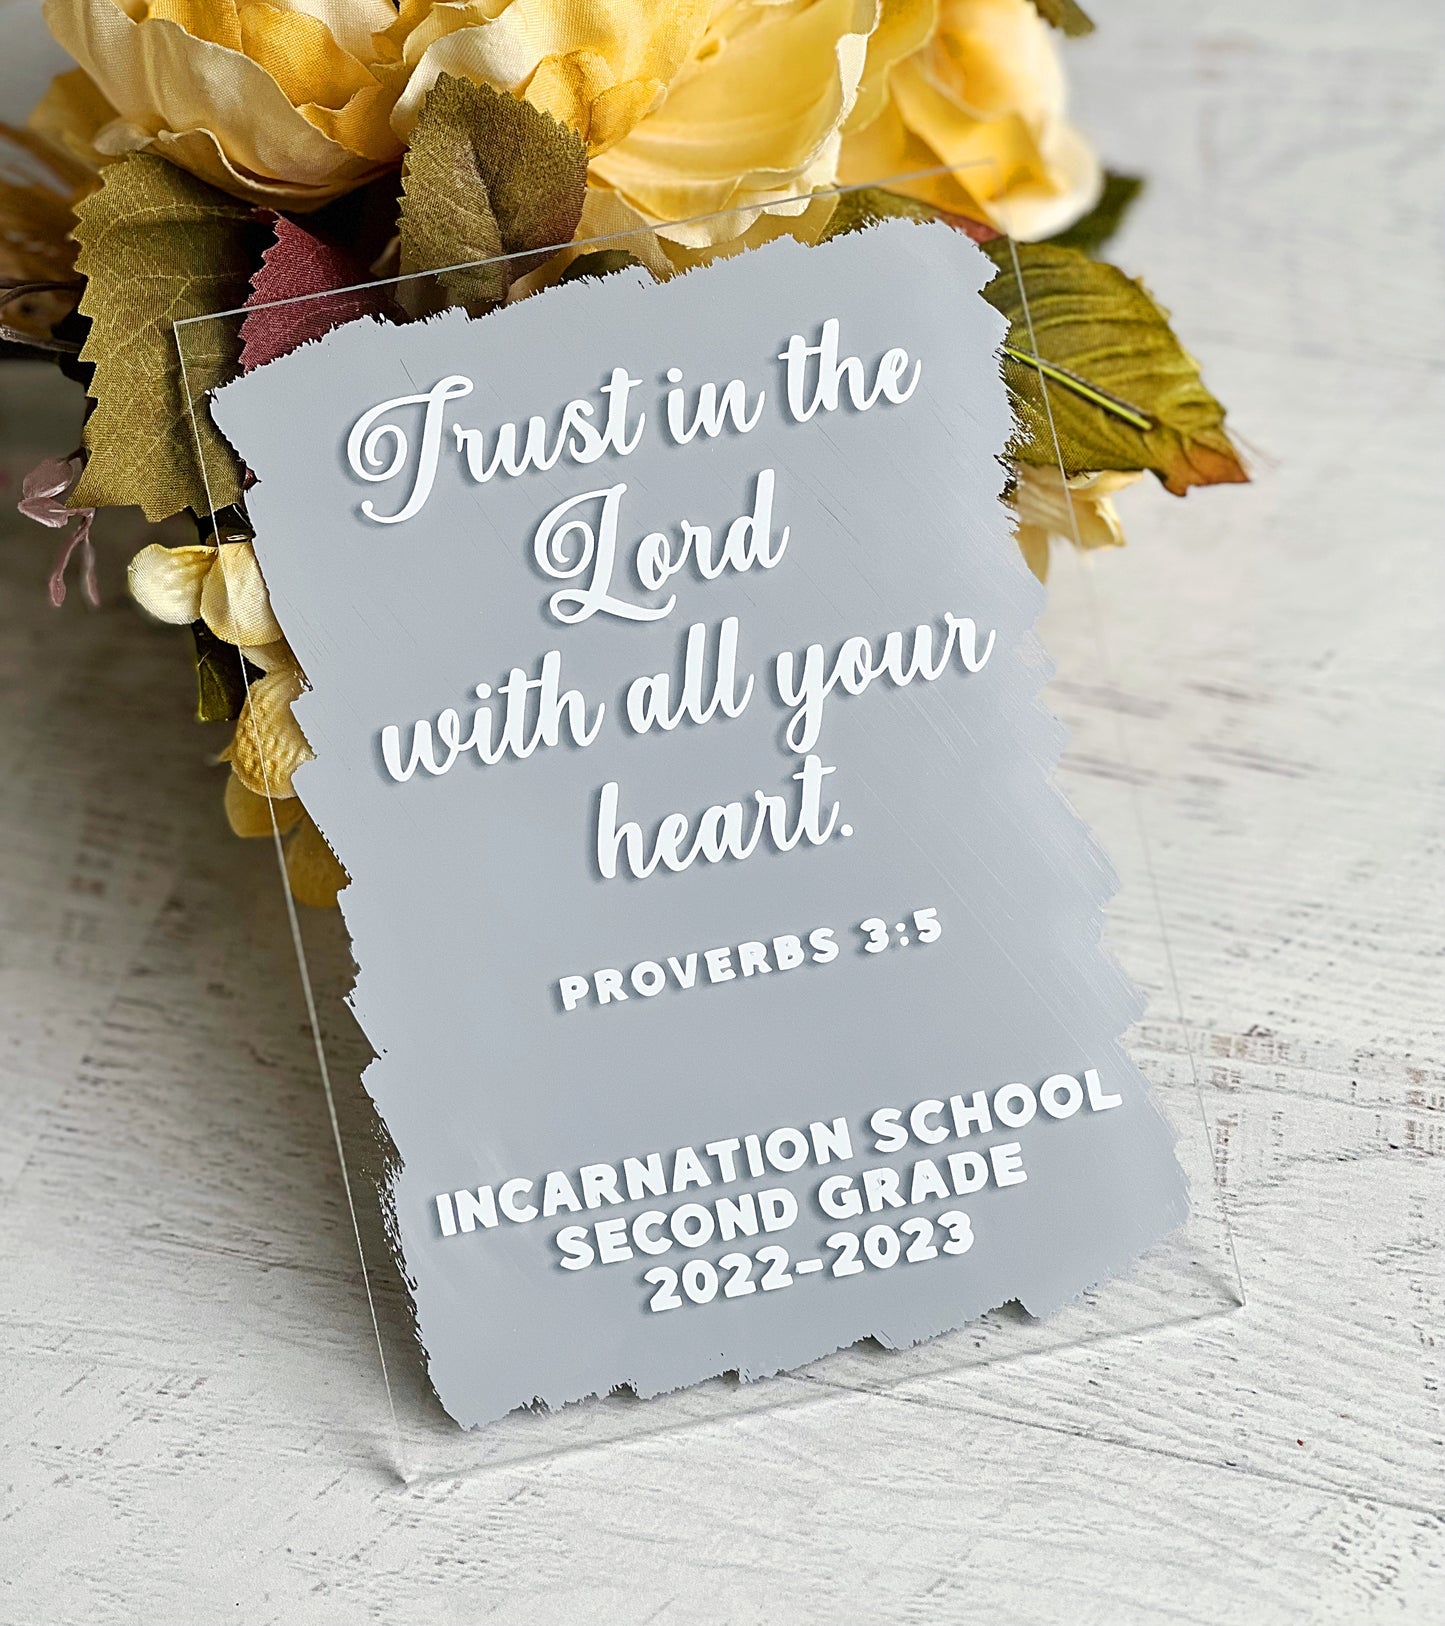 Custom Acrylic Sign | Cards and Gifts Sign | Bible Verse Acrylic Sign | Wedding Favors Sign